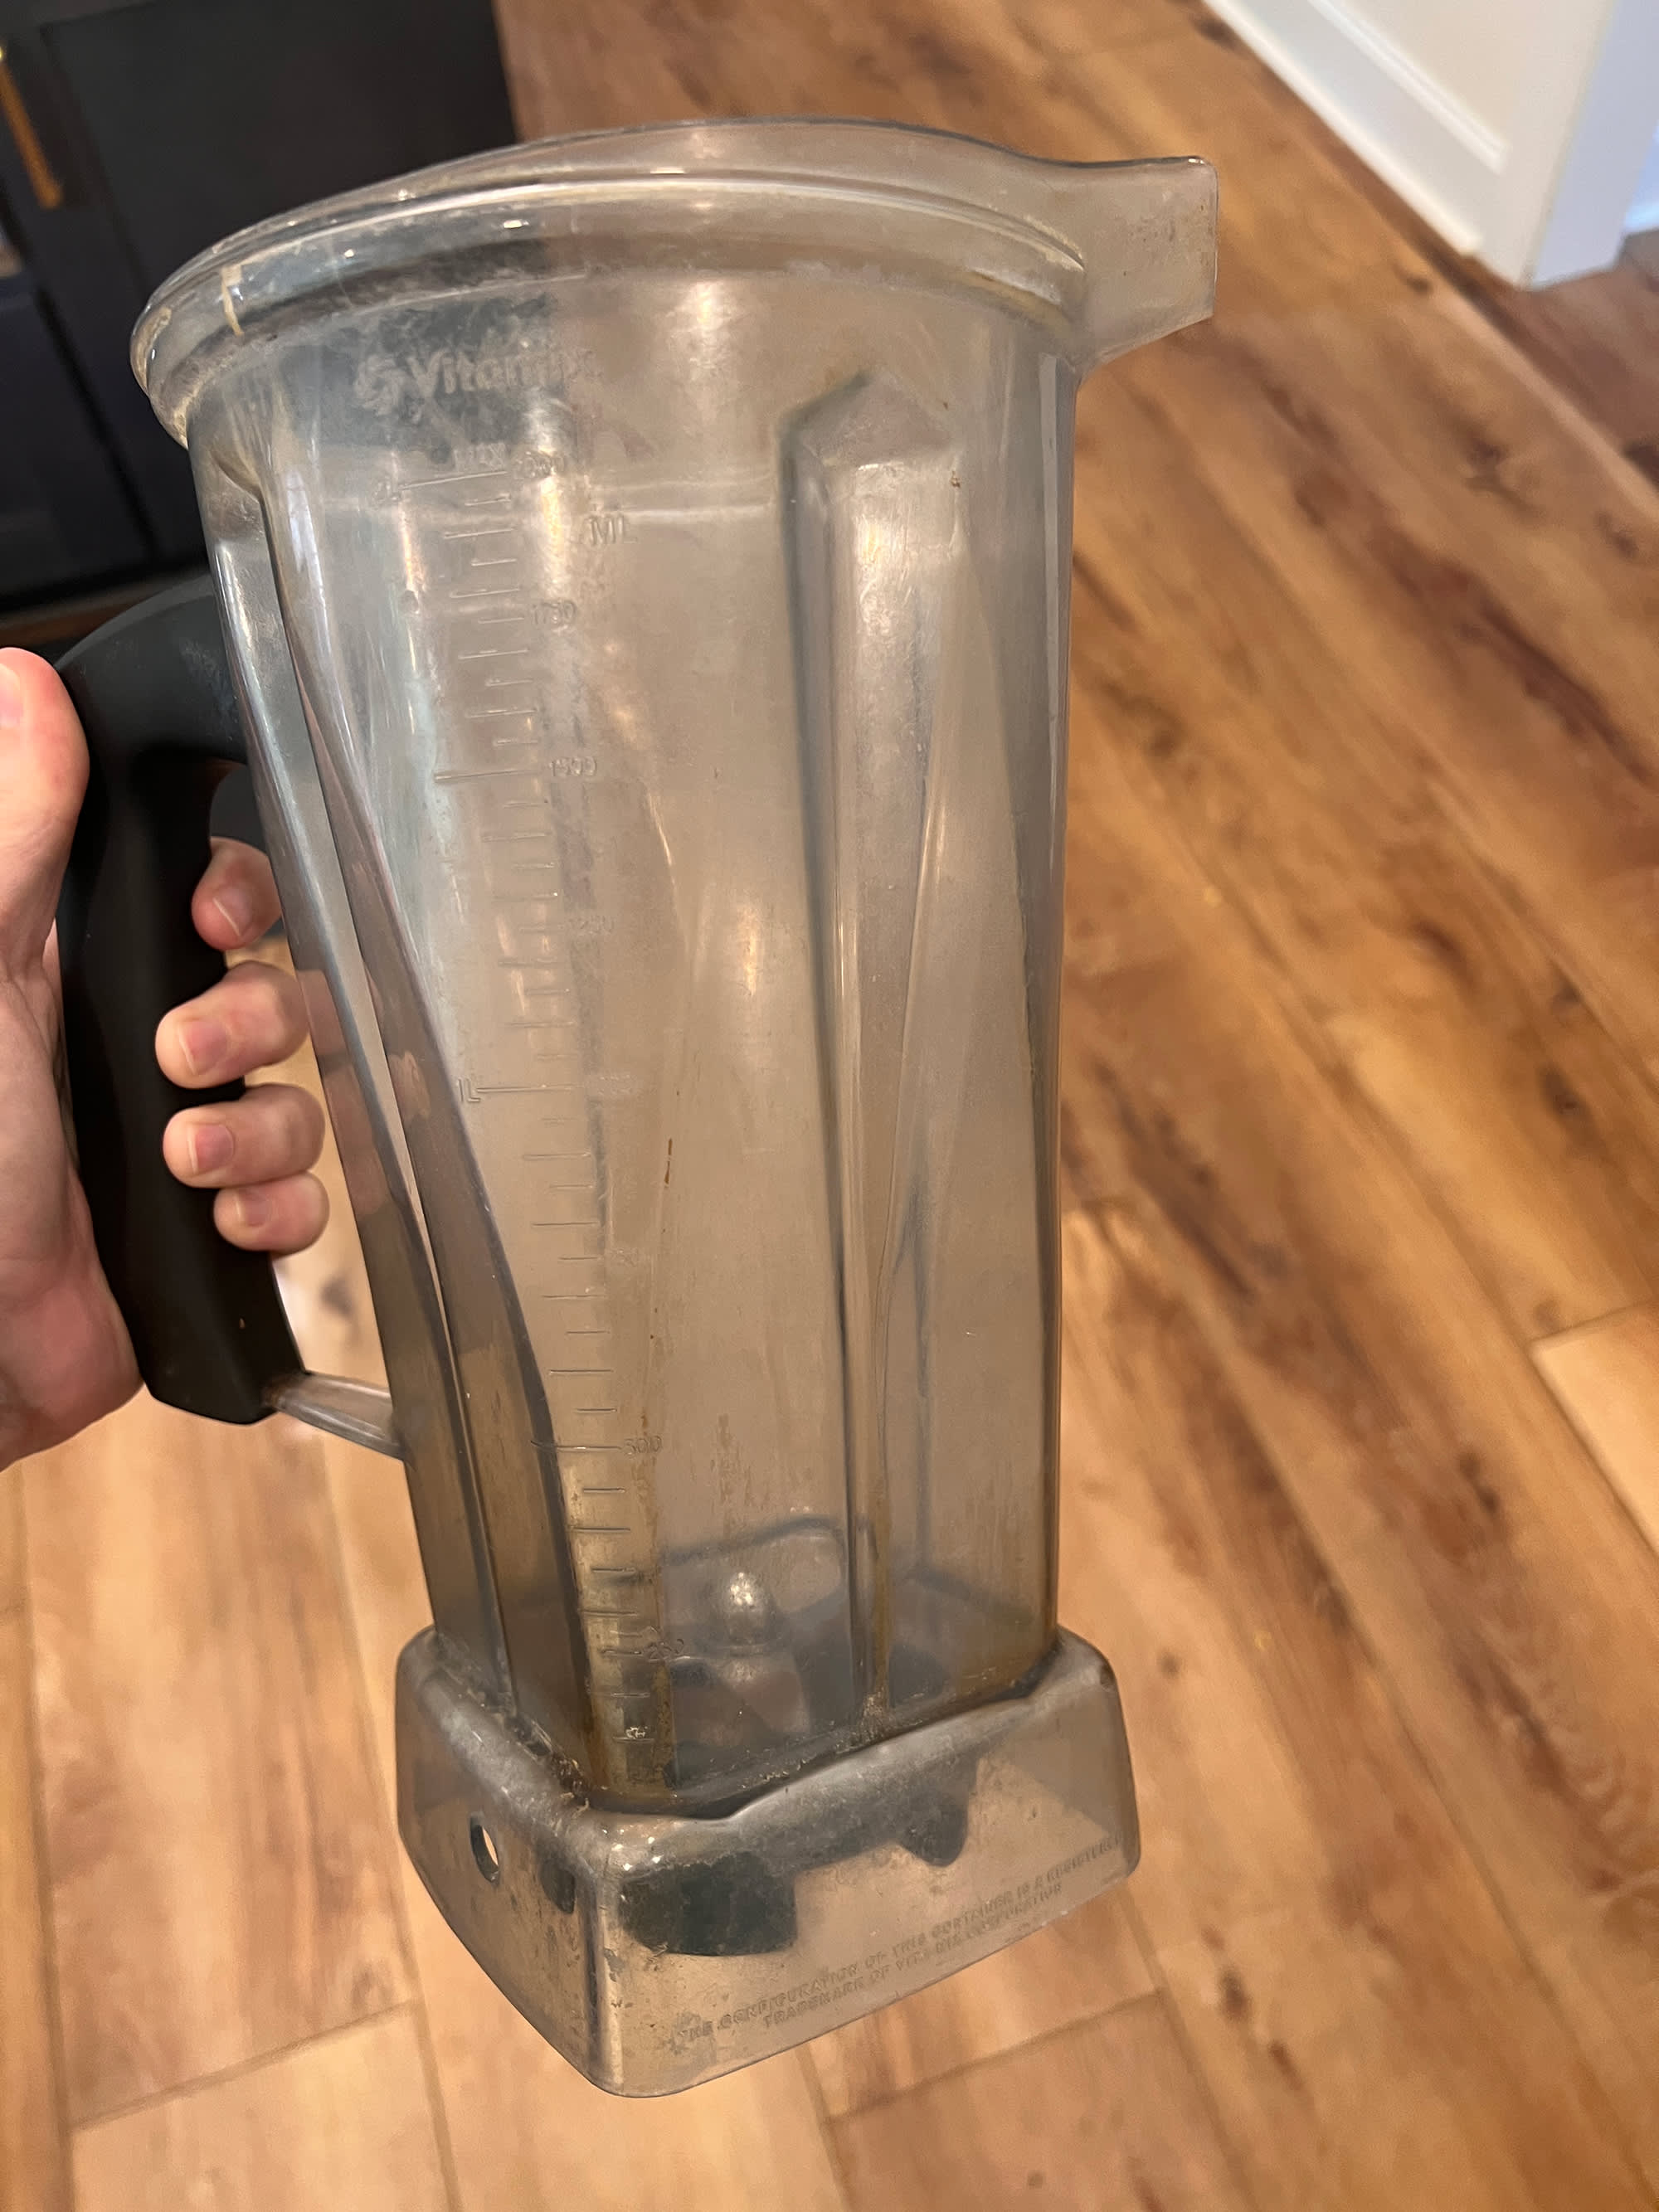 https://cdn.apartmenttherapy.info/image/upload/v1687273611/k/Edit/2023-06-this-method-finally-got-my-cloudy-blender-clear/this-method-finally-got-my-cloudy-blender-clear-3742.jpg